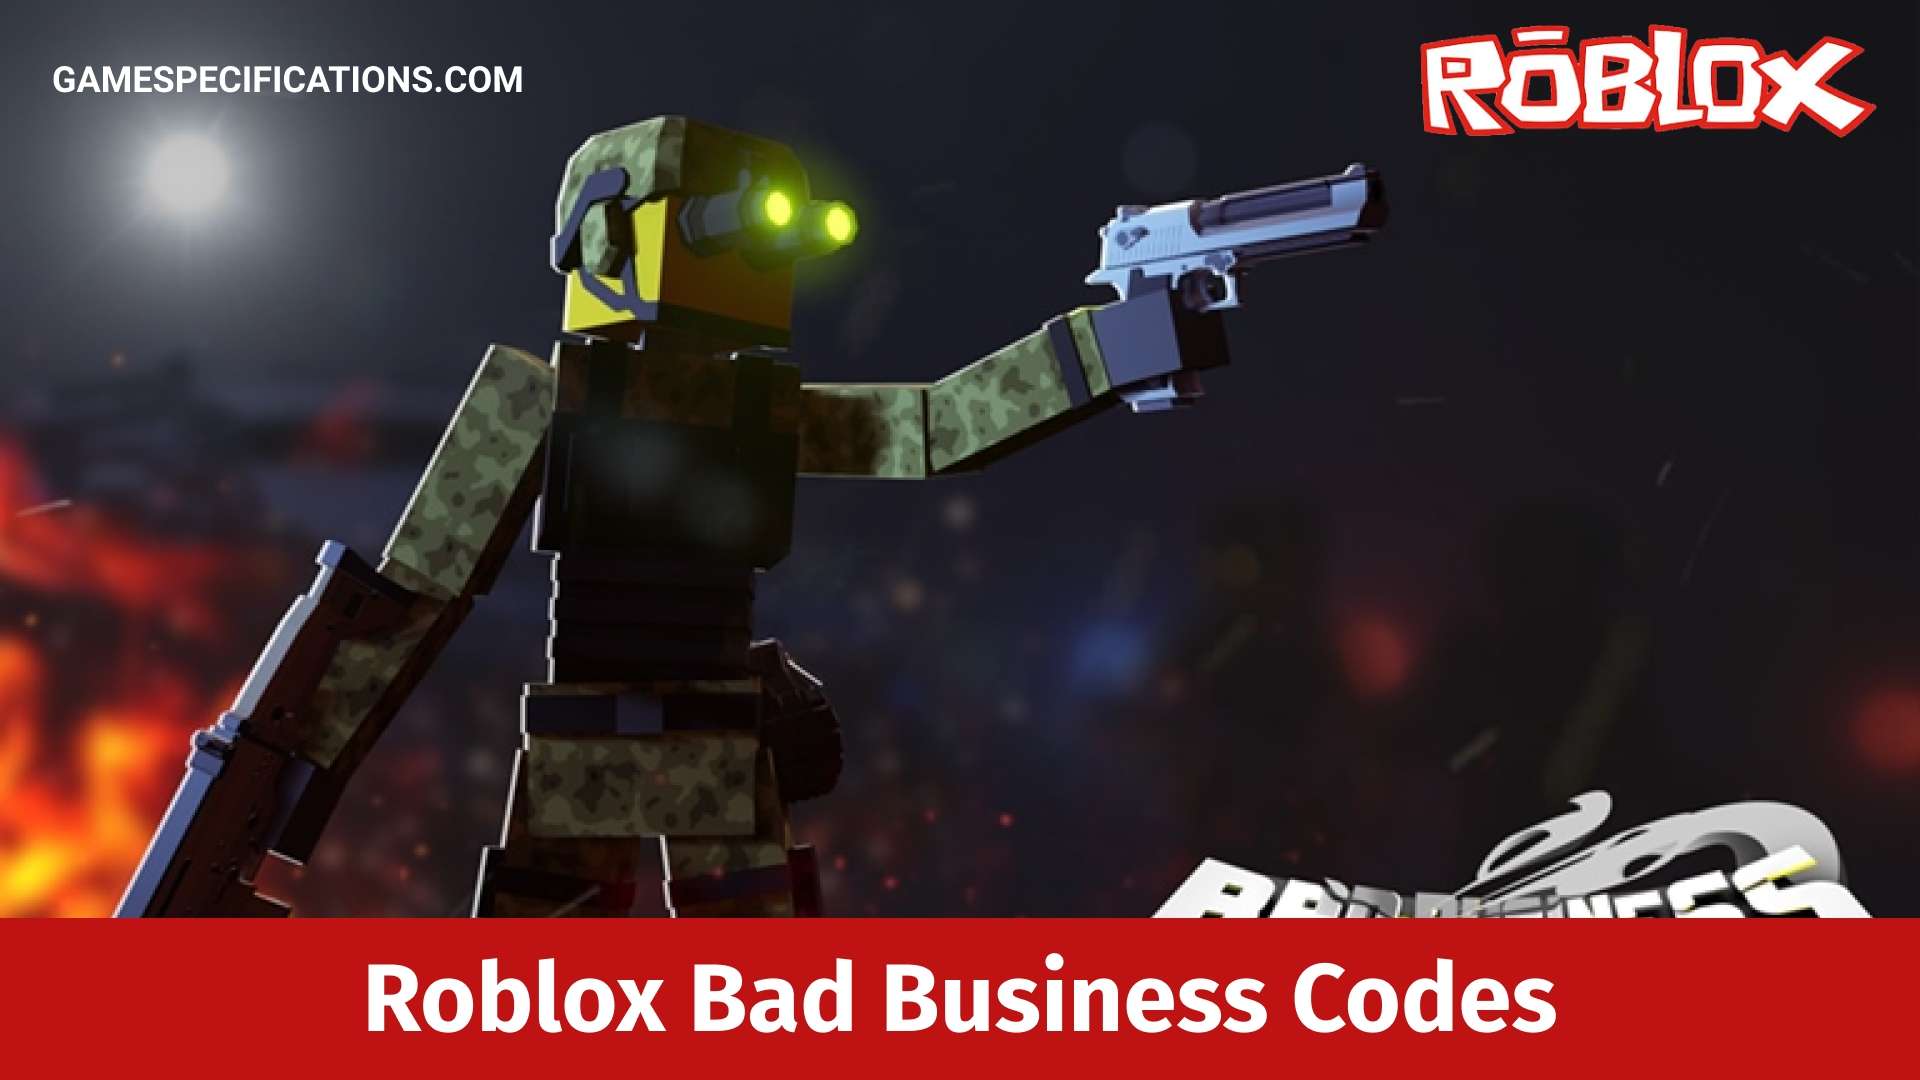 Roblox Bad Business Codes July 2021 Game Specifications - roblox bakery tycoon twitter codes